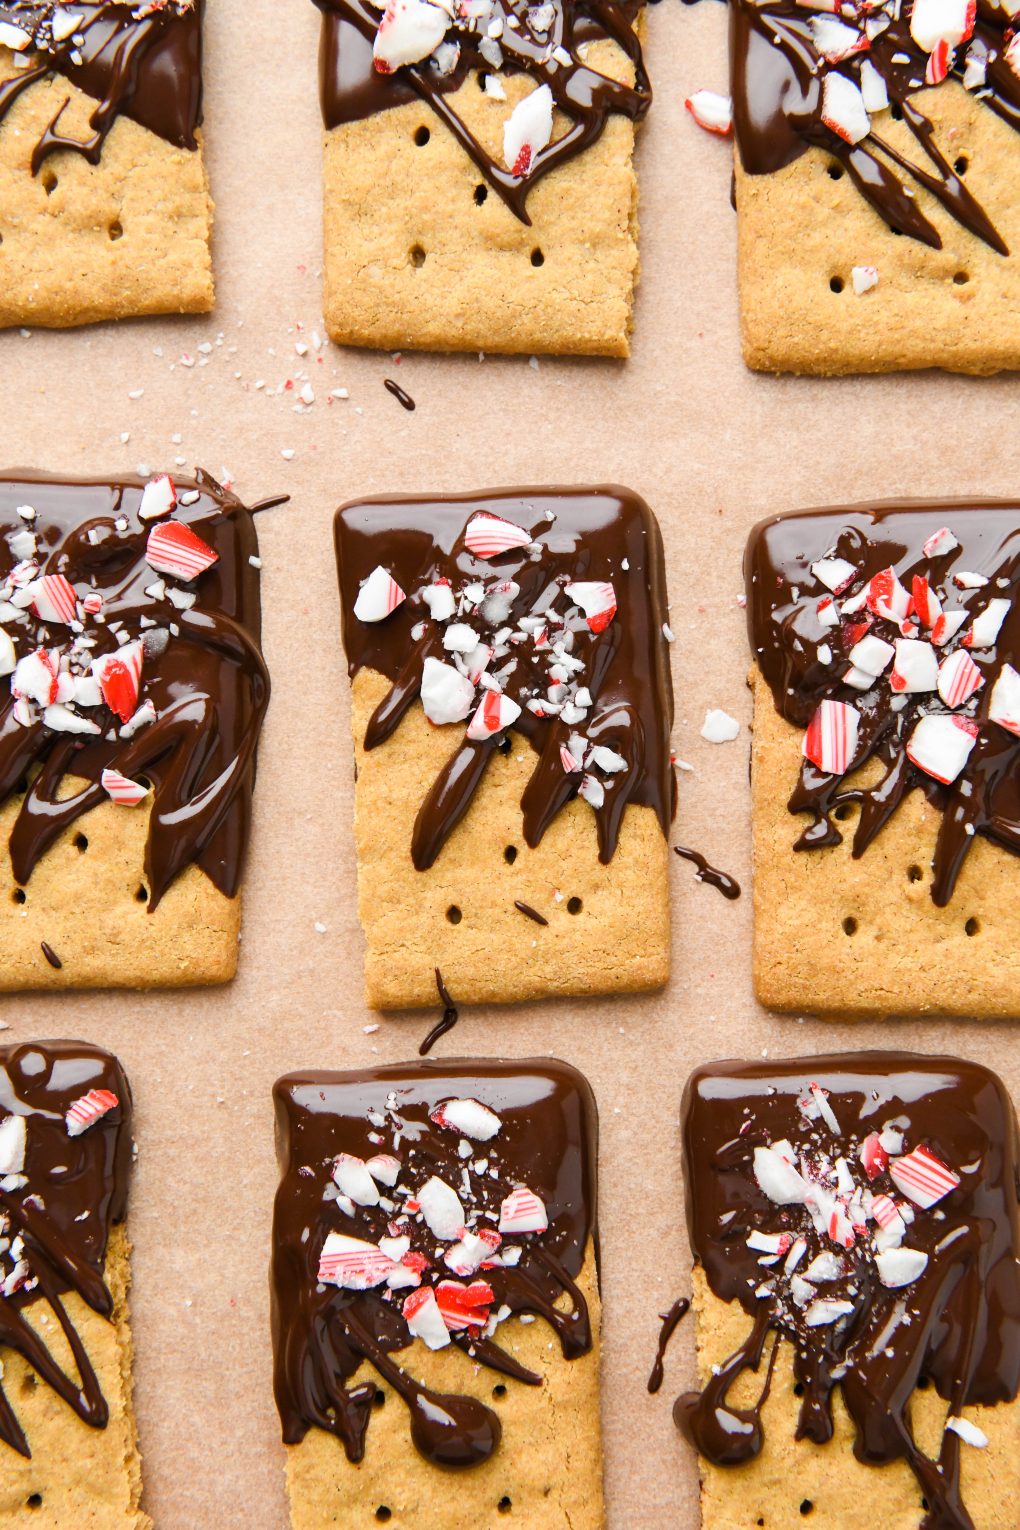 Chocolate dipped graham crackers topped with crushed candy canes on a parchment lined surface.